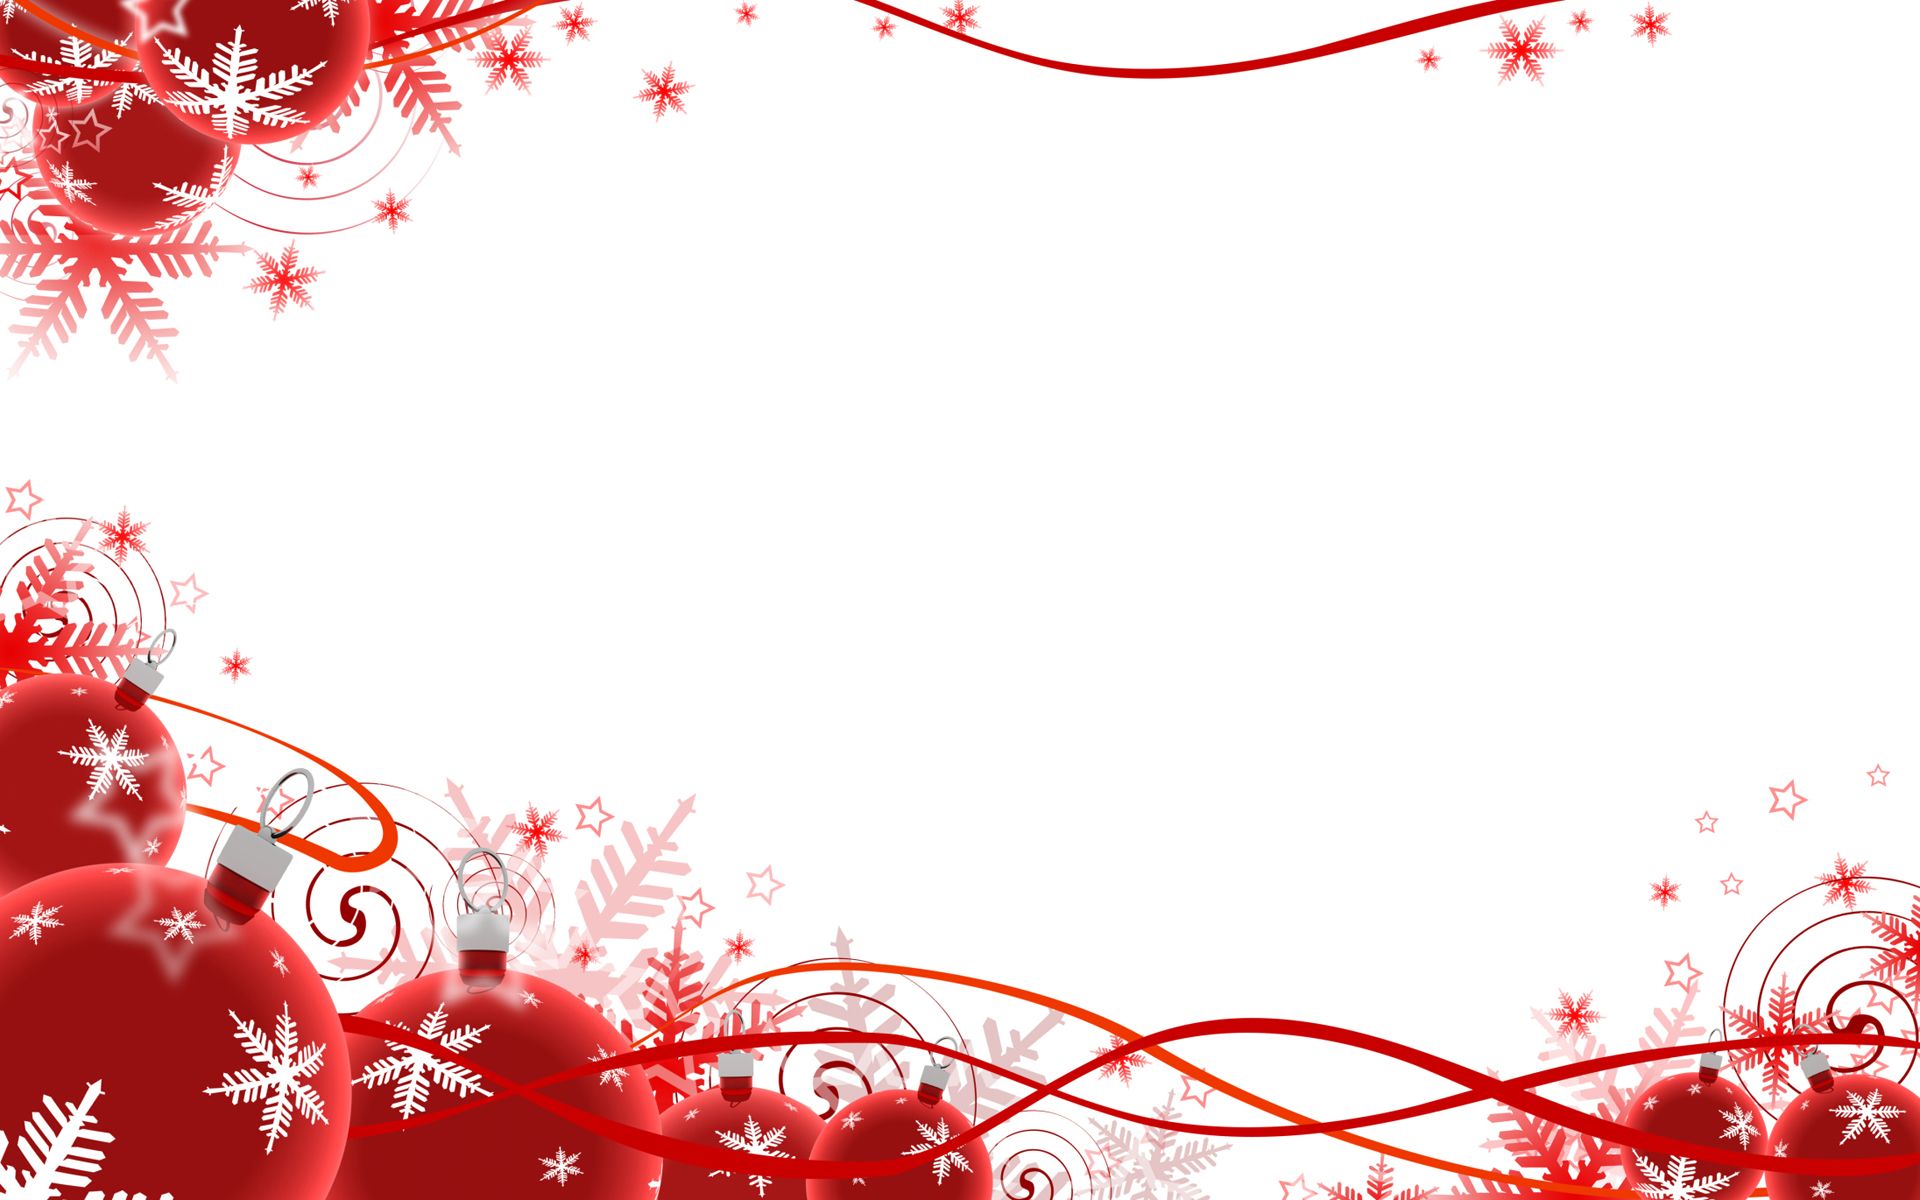 holiday background - Google Search | Holidays! | Pinterest ...